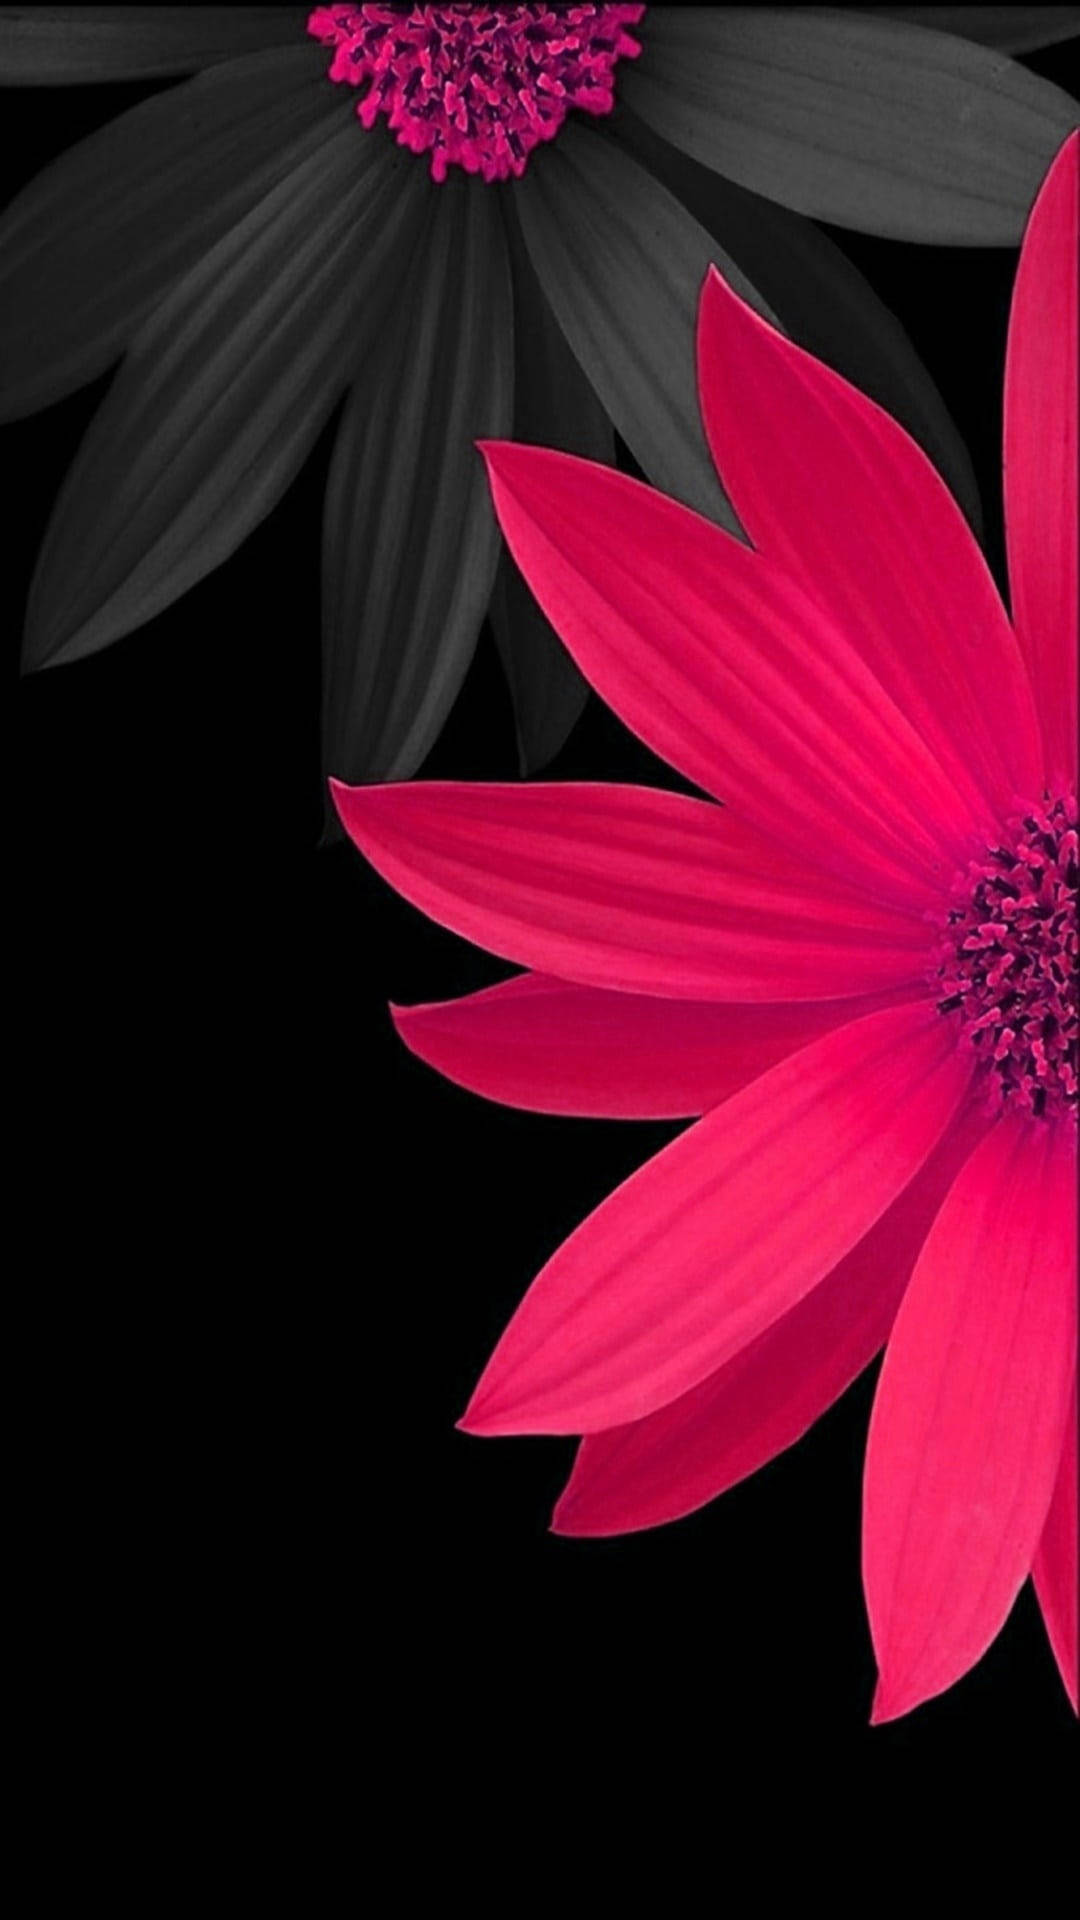 Free Flower Mobile Wallpaper Downloads, [100+] Flower Mobile Wallpapers for  FREE 